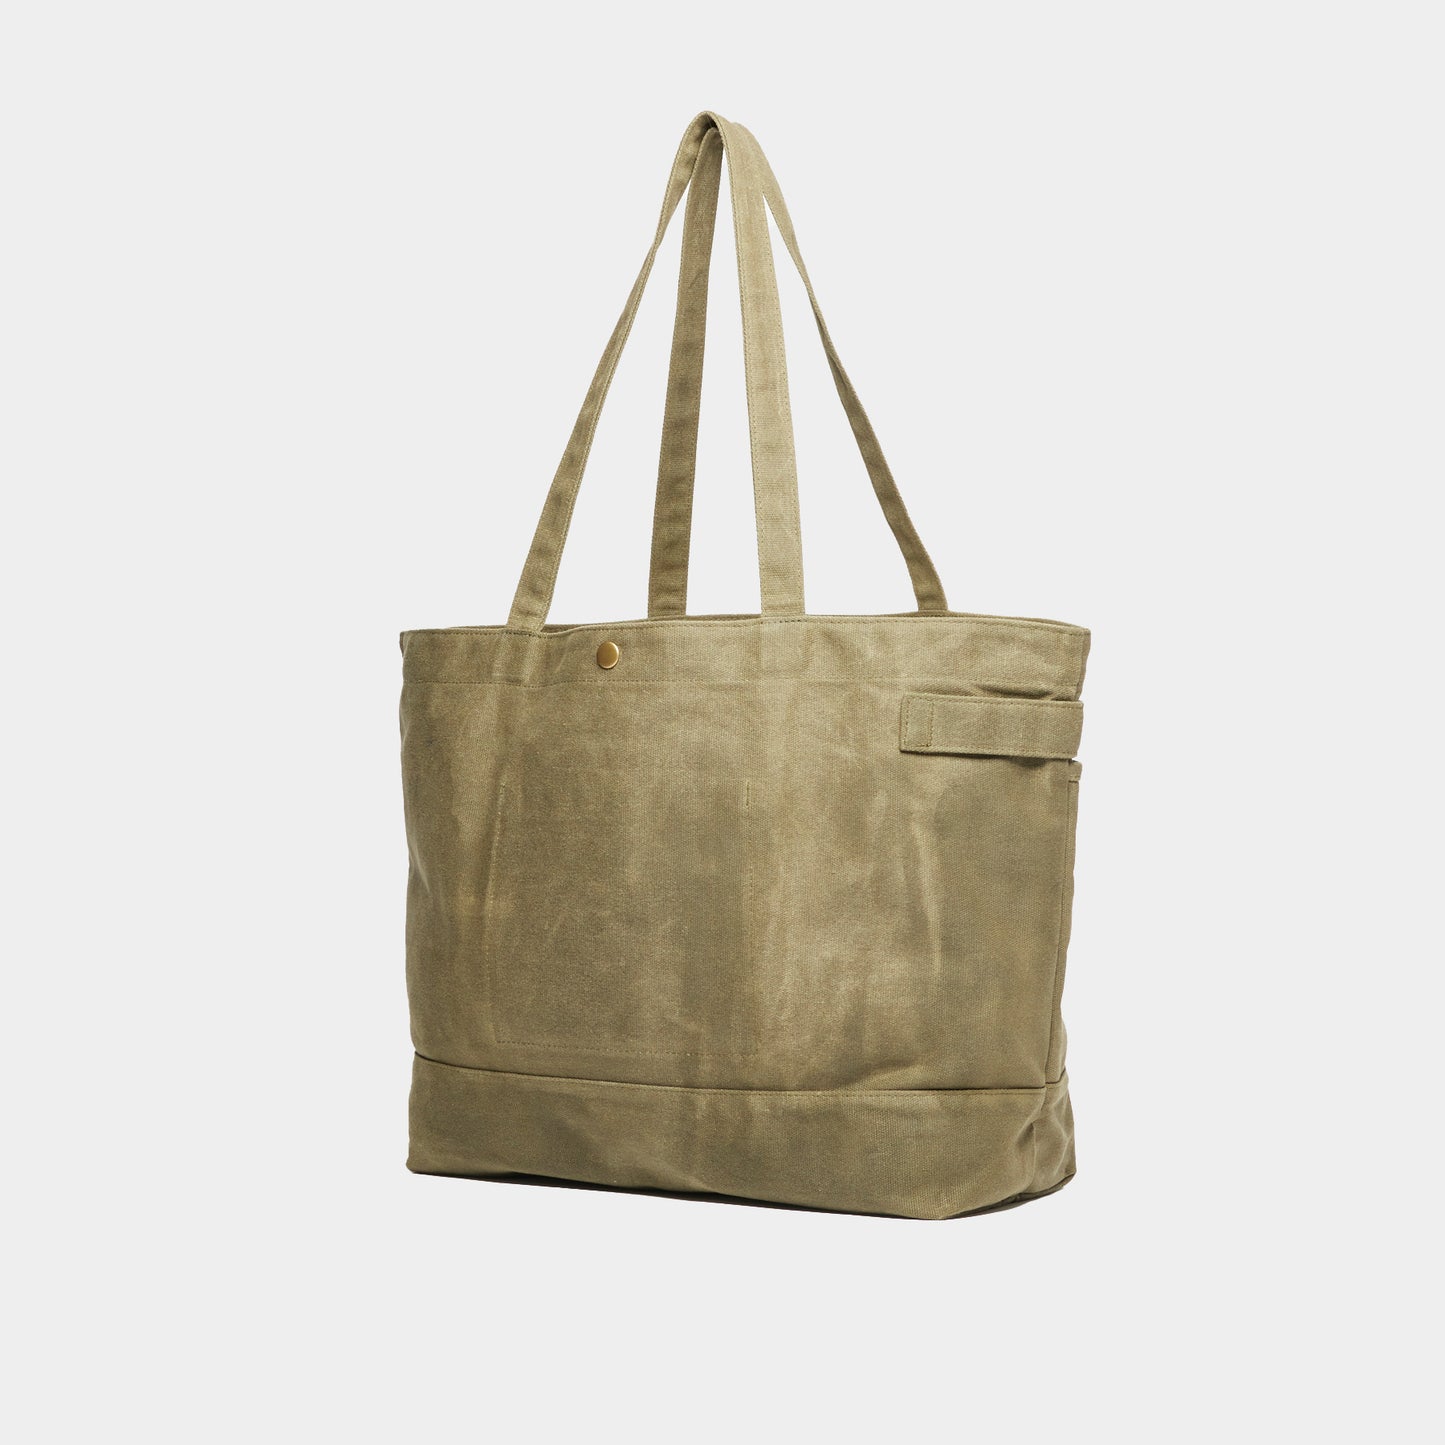 Todd Snyder x Gardenheir Waxed Cotton Tote Bag in Olive